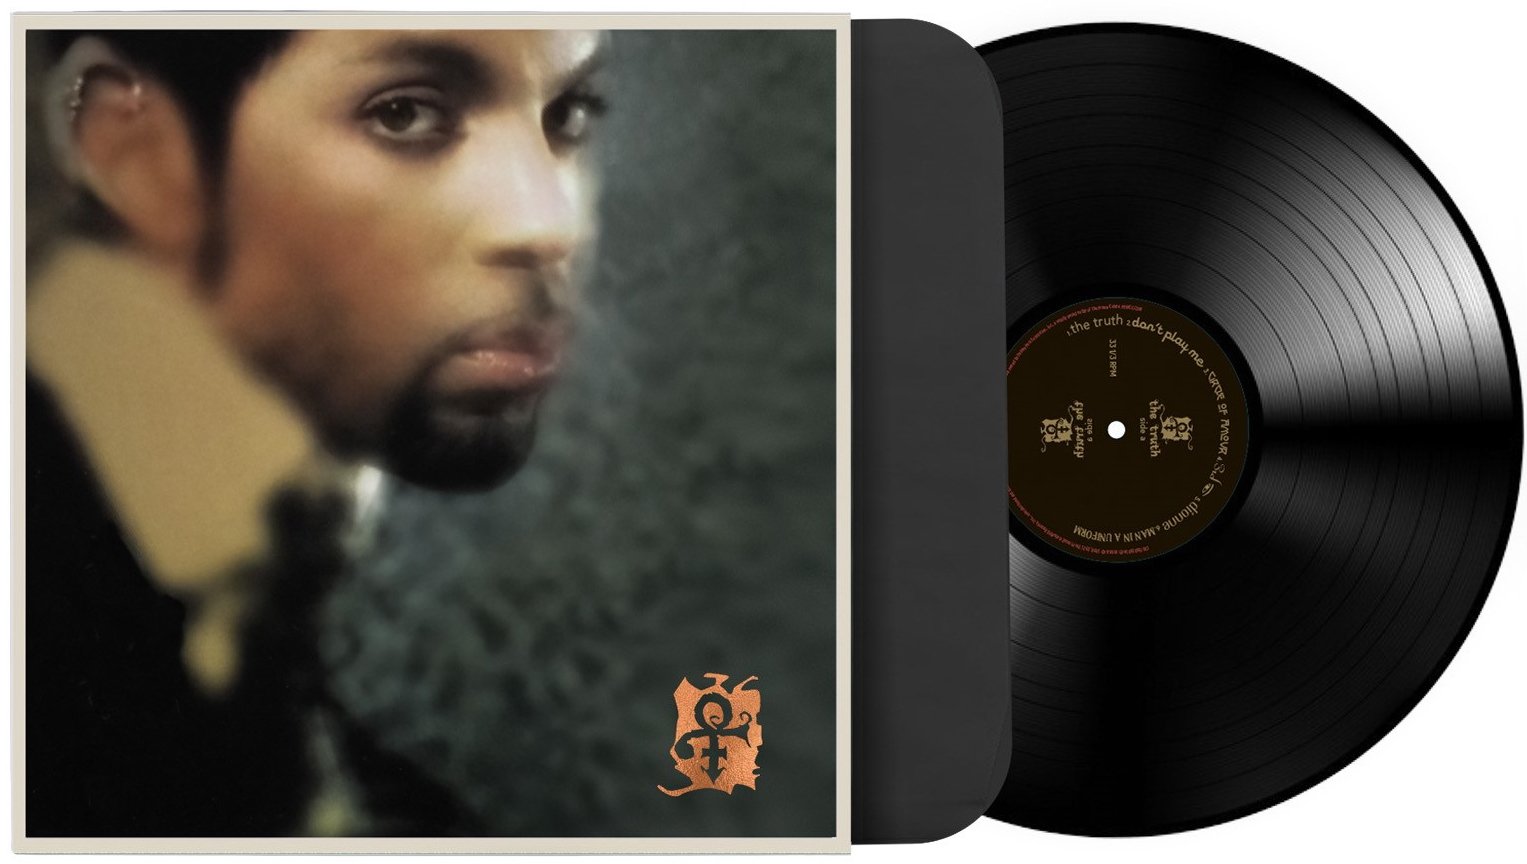 Prince&#8217;s &#8216;The Truth&#8217; &amp; &#8216;The Gold Experience&#8217; On Black Vinyl June 9